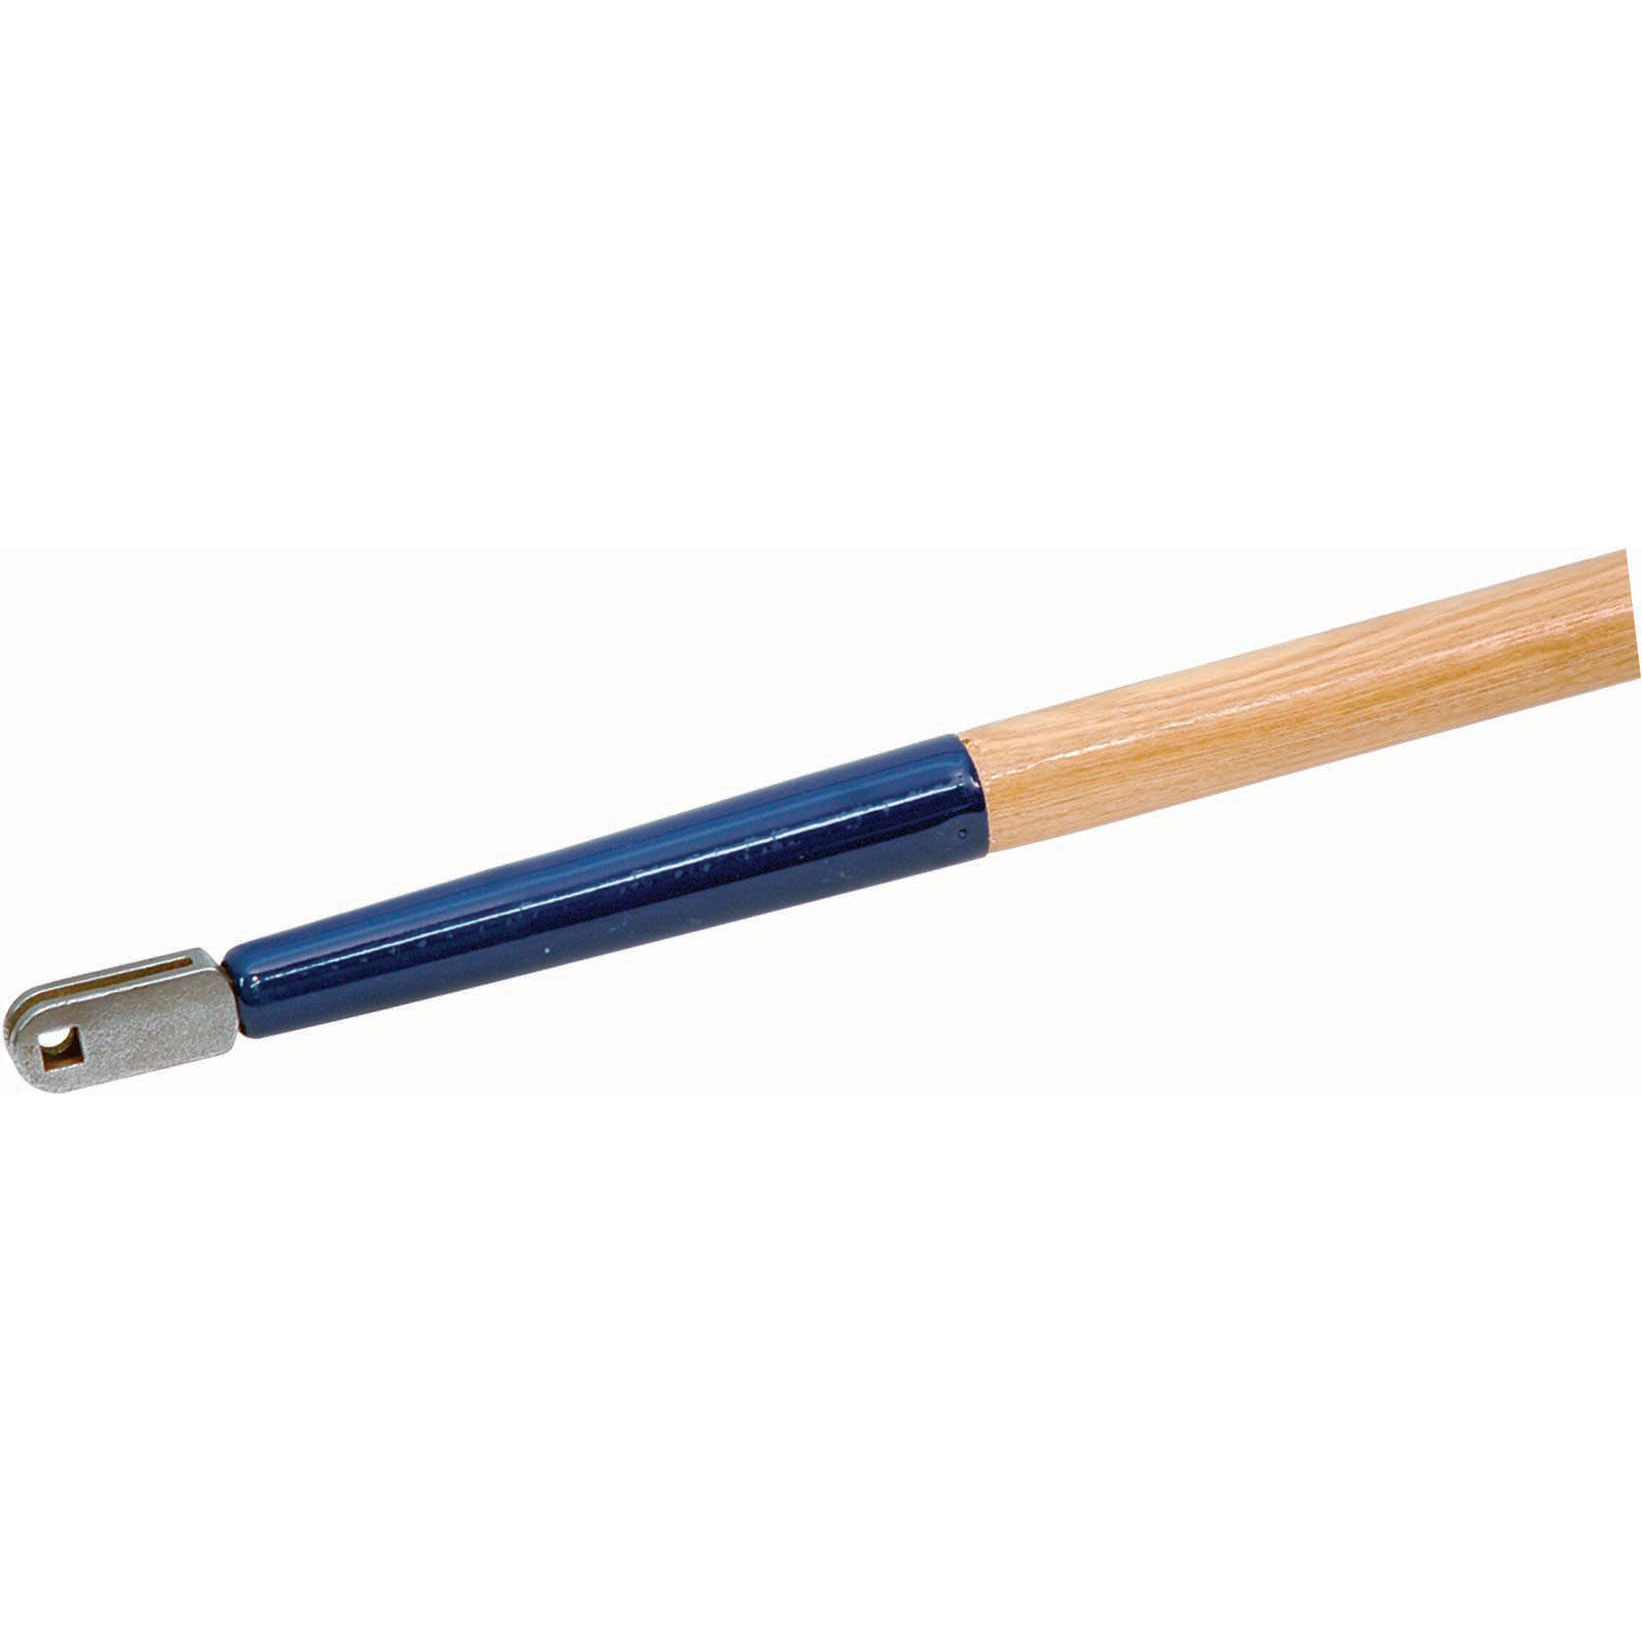 Marshalltown 10NC 72in. Wood Handle-Narrow Cast Clevis MAT-10NC